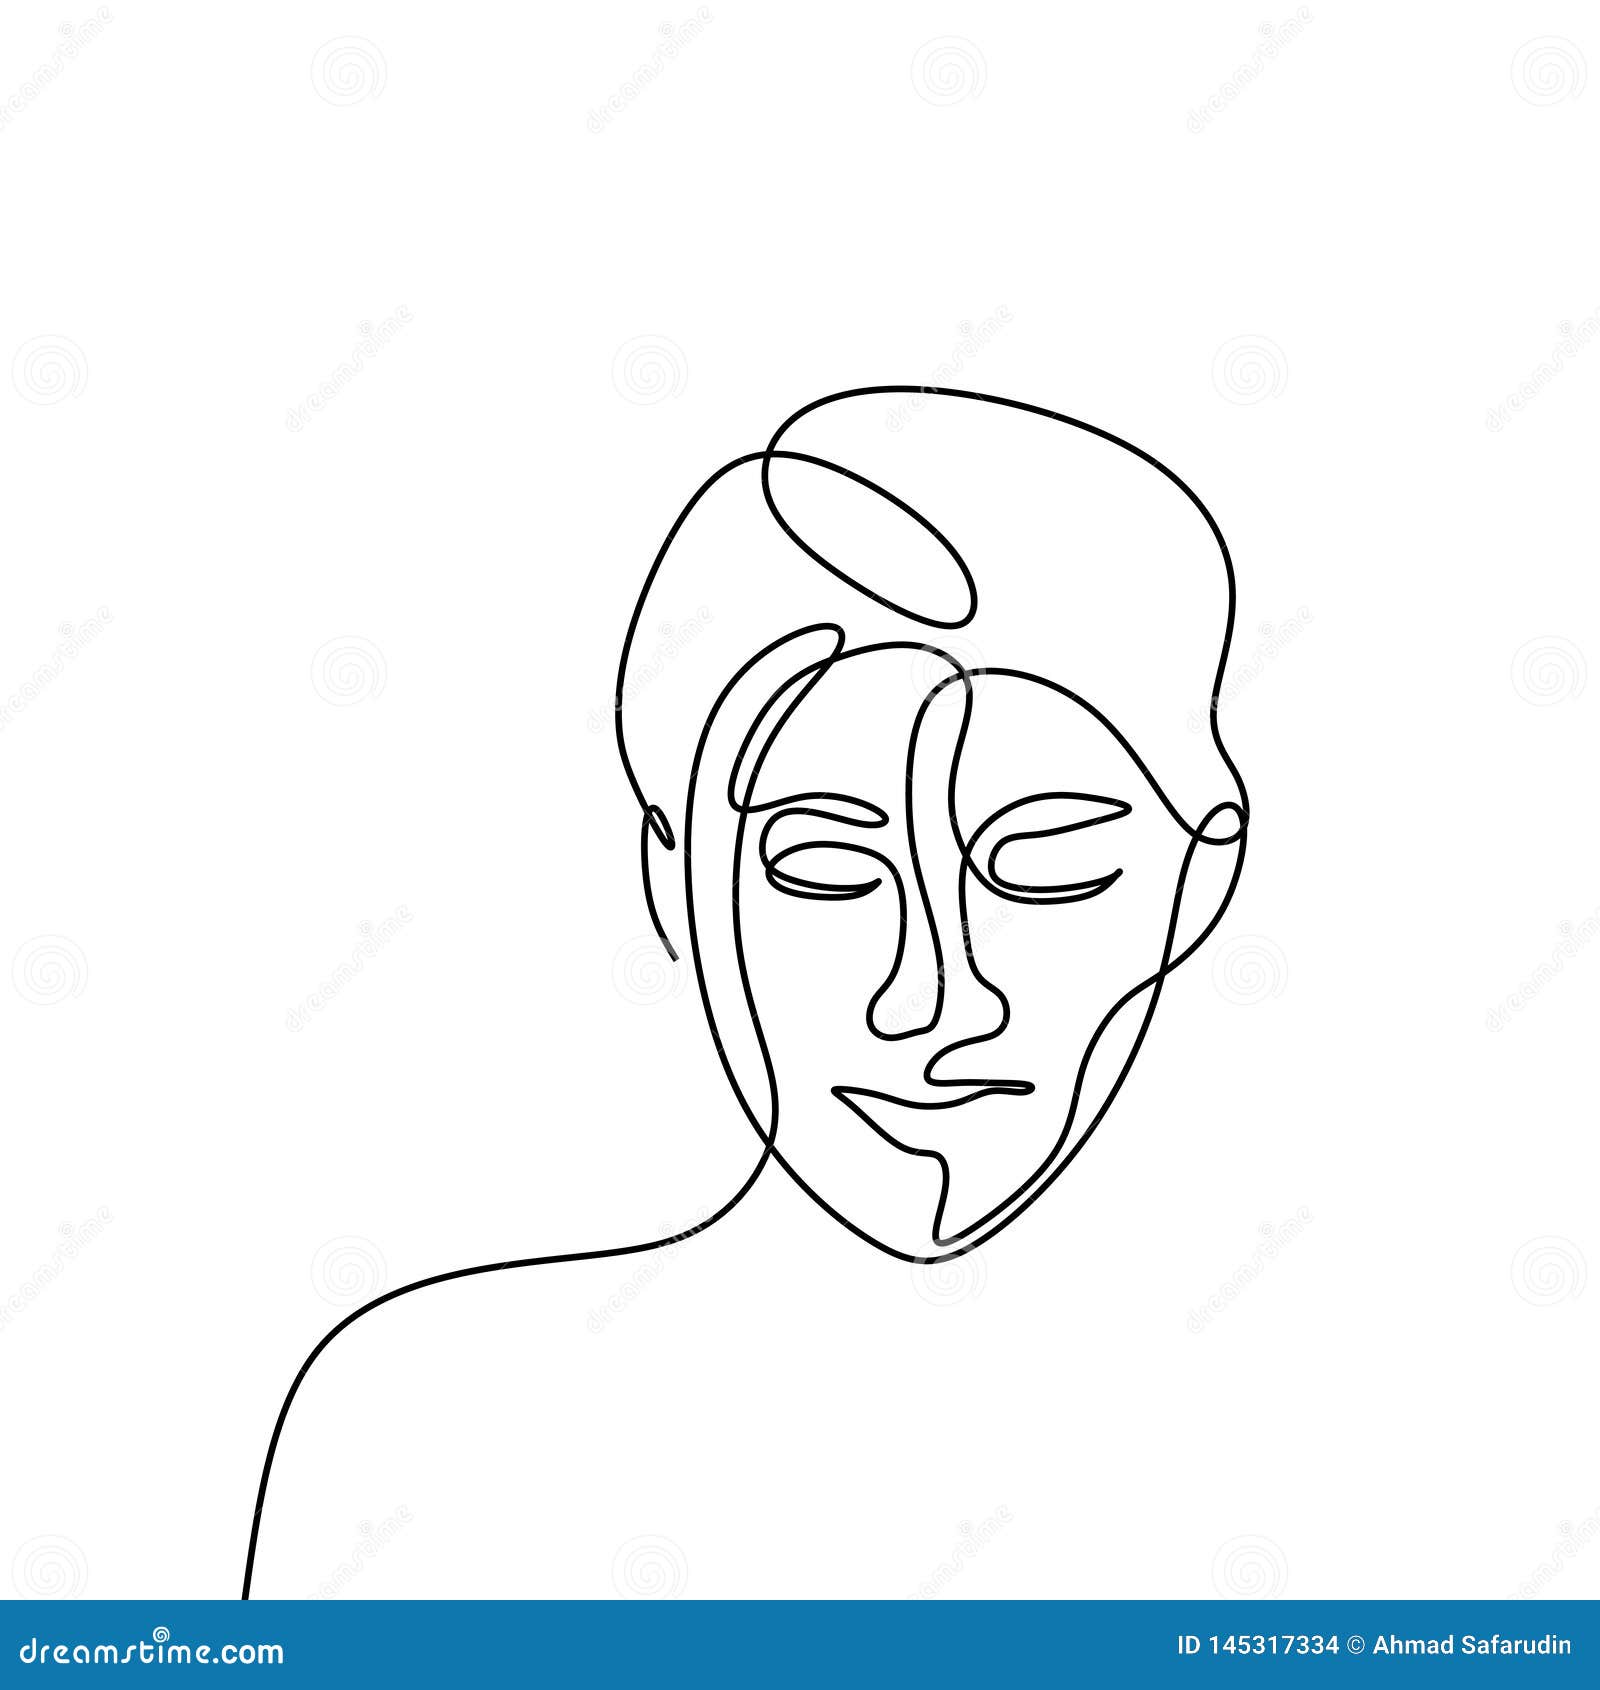 Girl Face Continuous Line Drawing Abstract Minimalist Design Stock Vector Illustration Of Graphic Fashion 145317334,Mid Century Modern Graphic Design Patterns